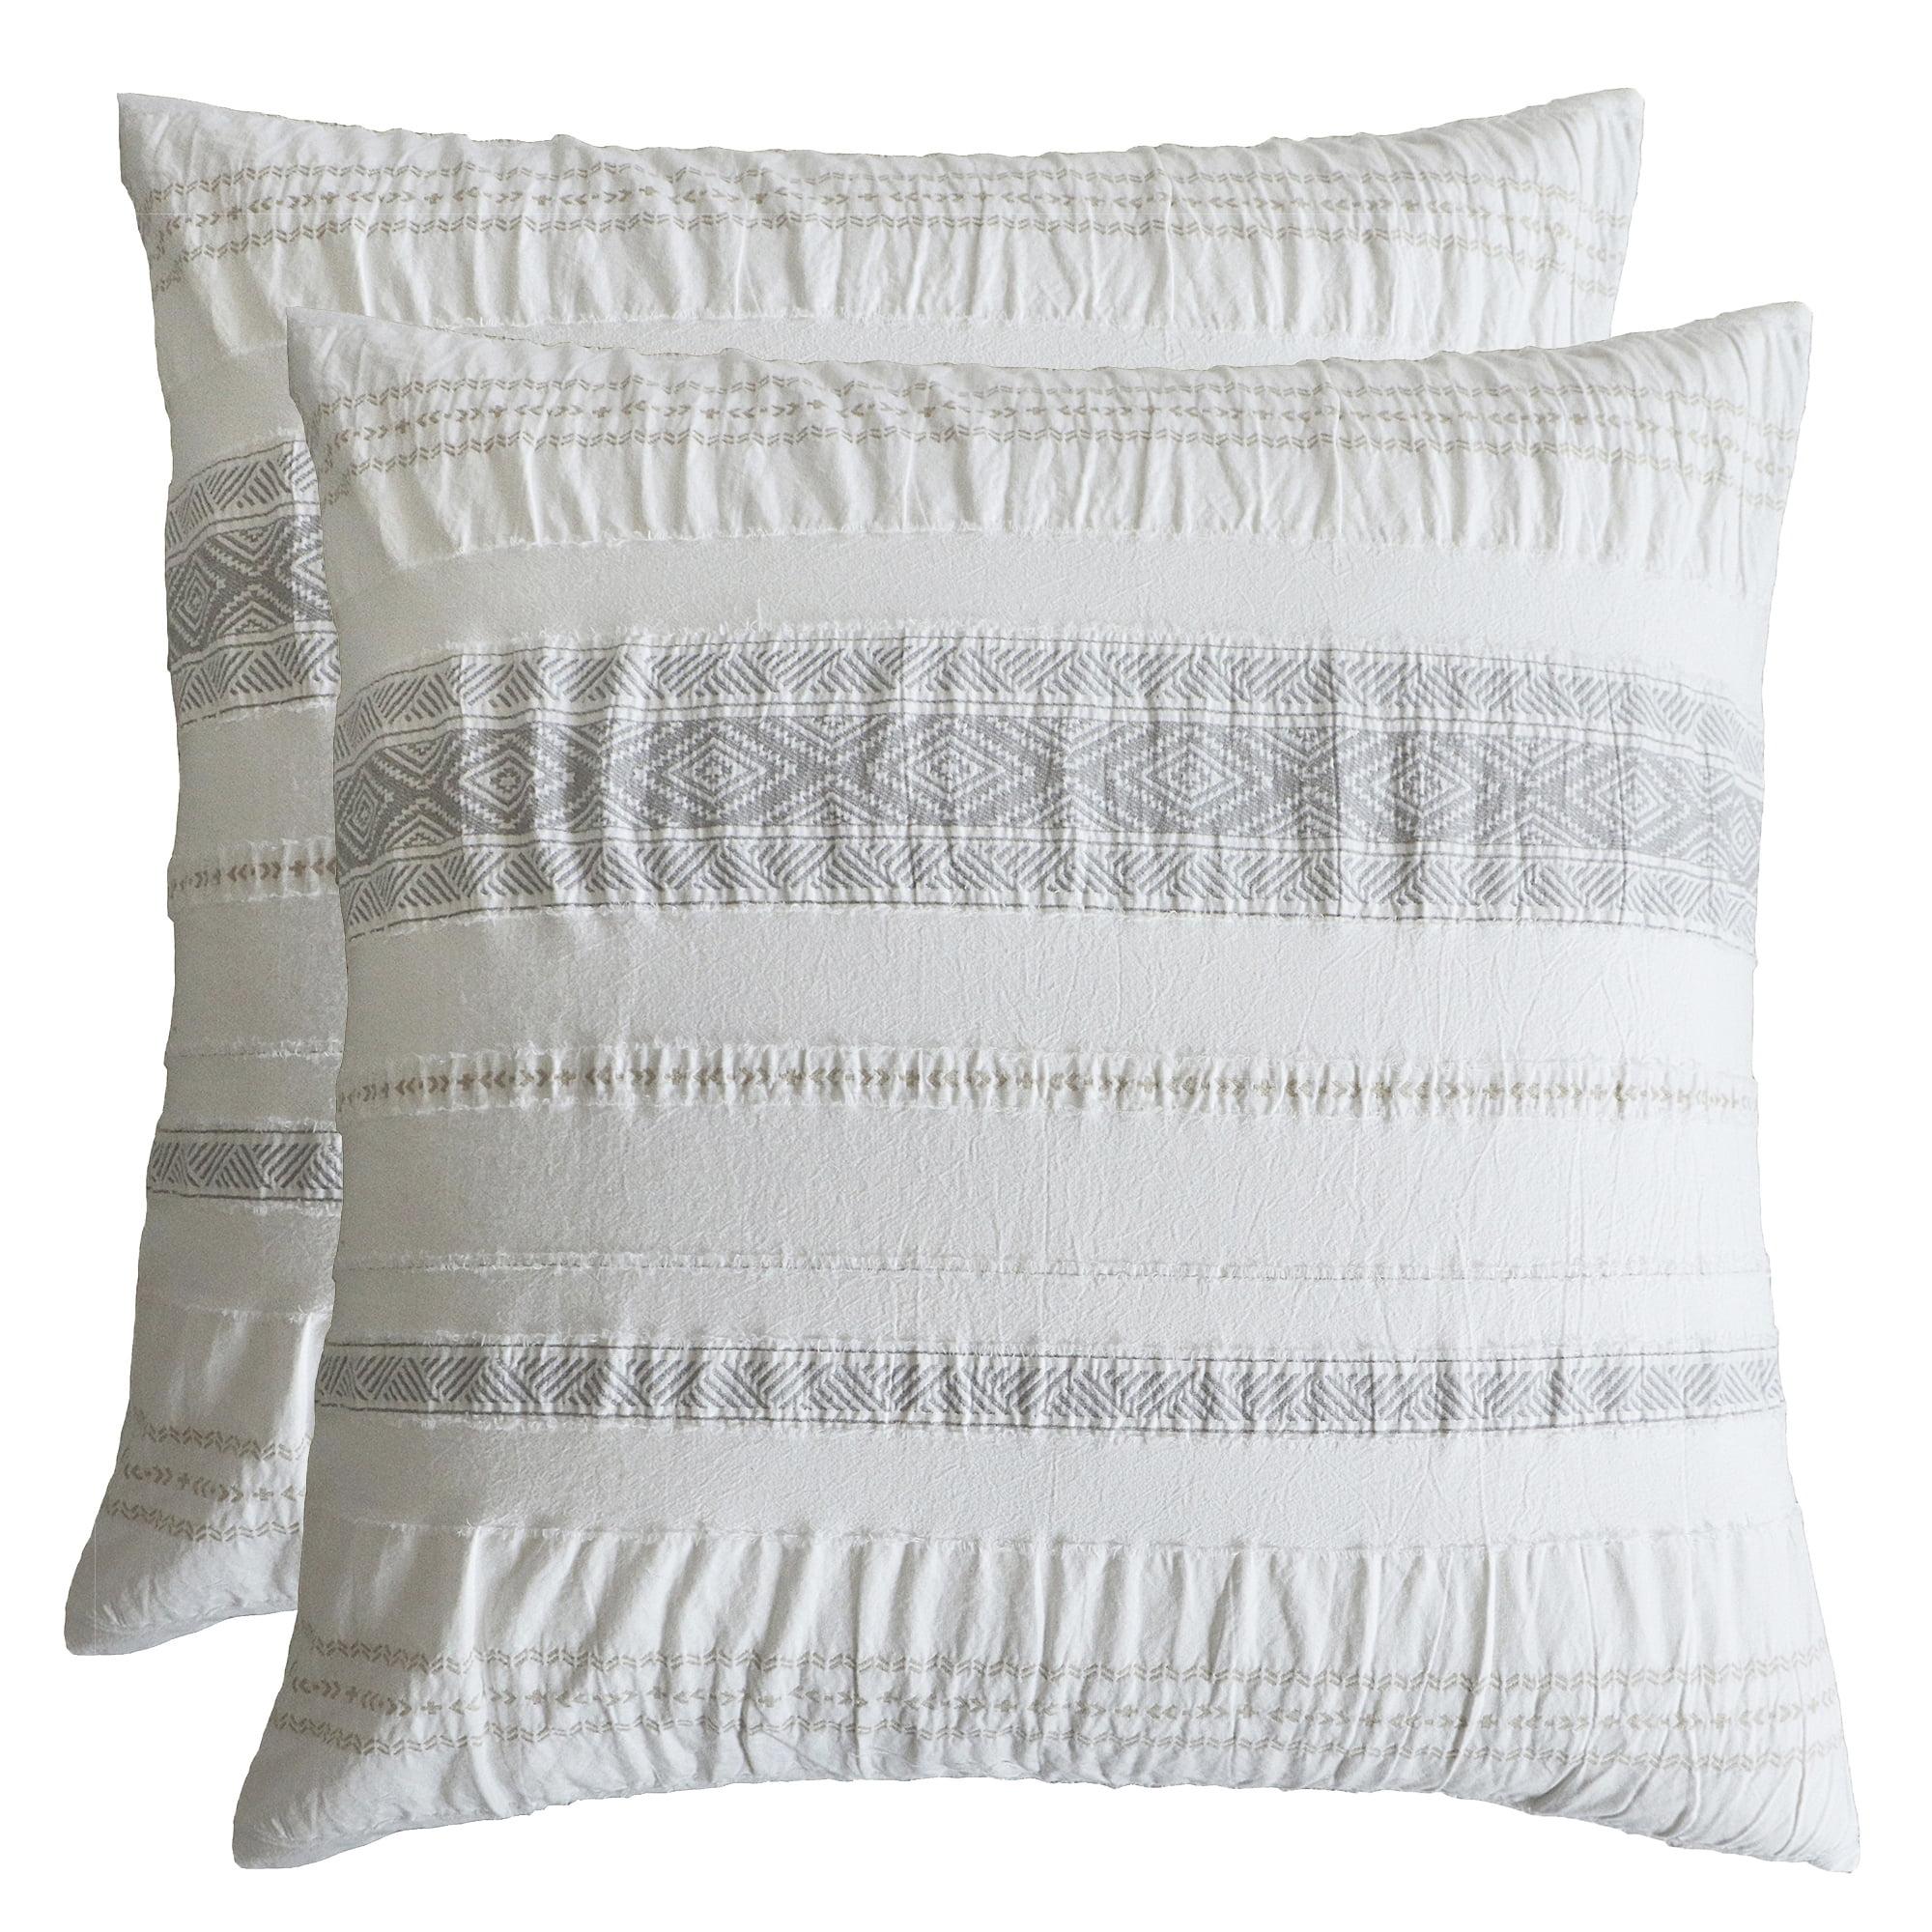 Bohemian Jacquard Euro Sham Set in Gray, Taupe, and Off-White - 26x26